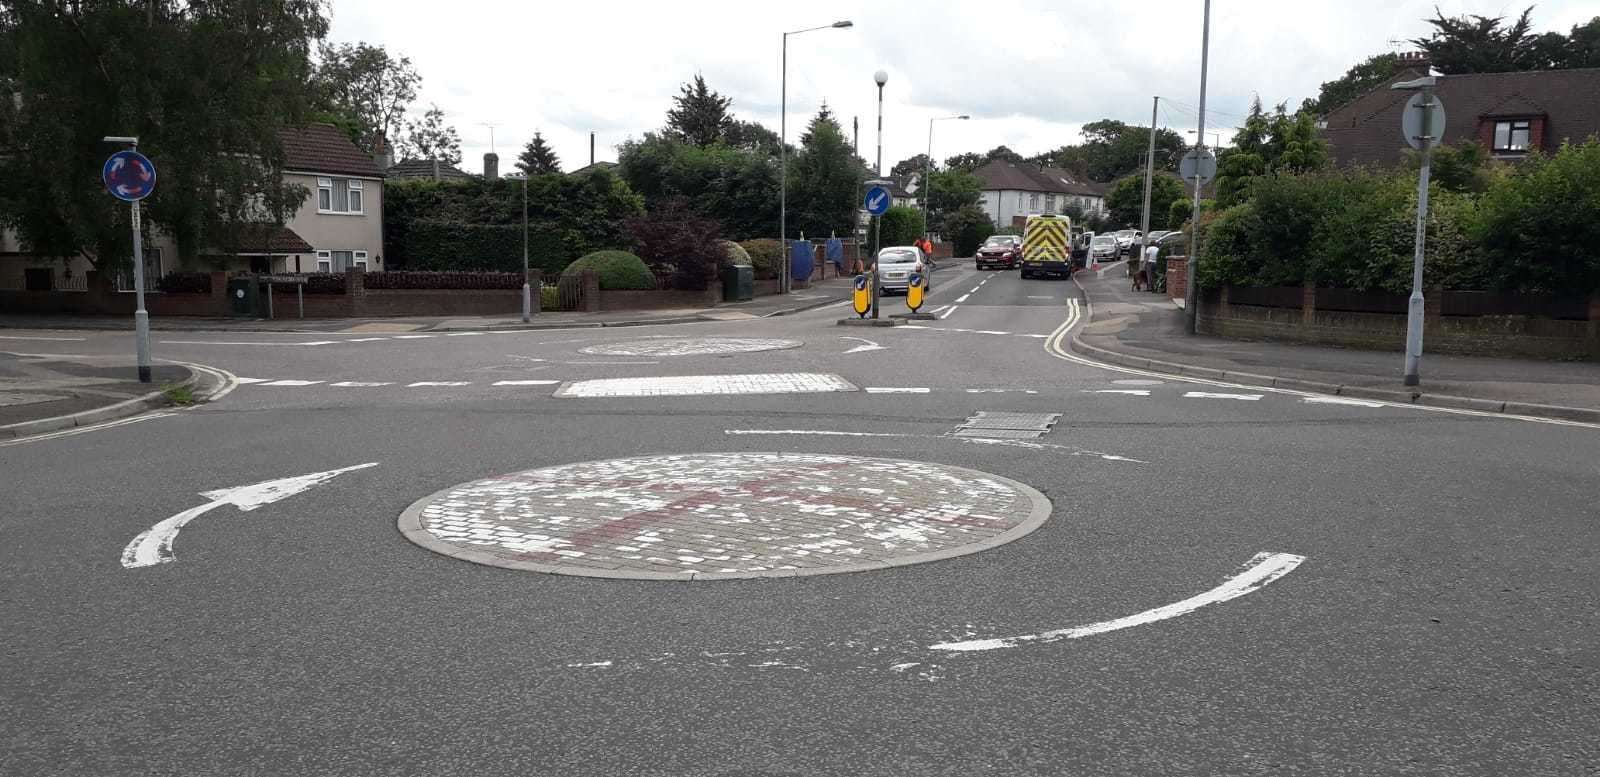 The roundabouts have been painted with red St George's crosses